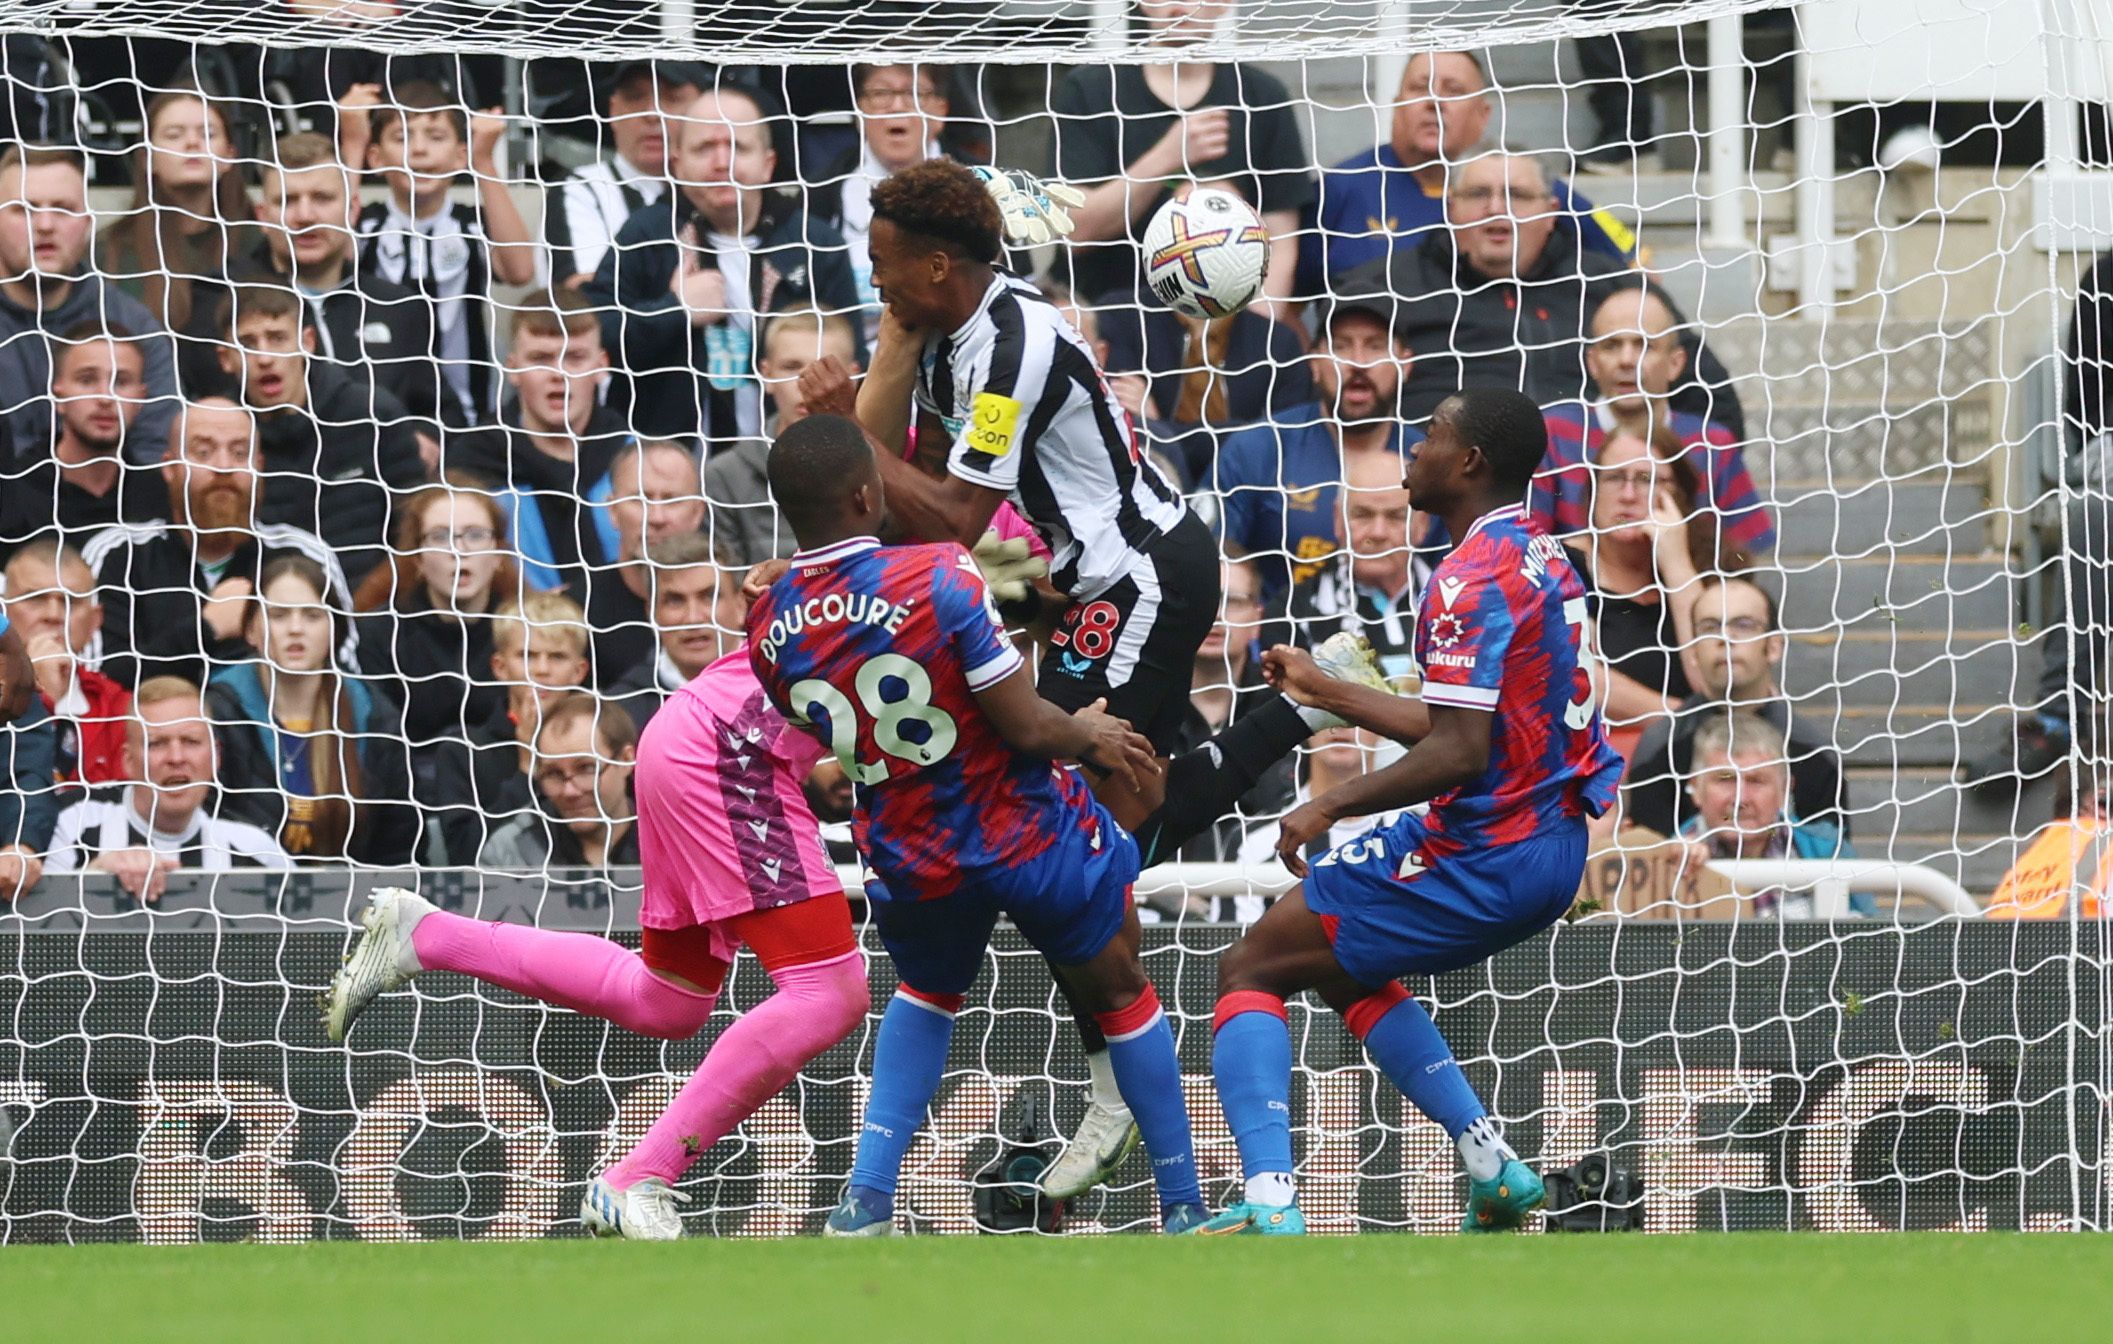 Soccer Football - Premier League - Newcastle United v Crystal Palace - St James' Park, Newcastle, Britain - September 3, 2022 Crystal Palace's Tyrick Mitchell scores an own goal and the first for Newcastle United as Newcastle United's Joe Willock challenges Action Images via Reuters/Lee Smith EDITORIAL USE ONLY. No use with unauthorized audio, video, data, fixture lists, club/league logos or 'live' services. Online in-match use limited to 75 images, no video emulation. No use in betting, games o